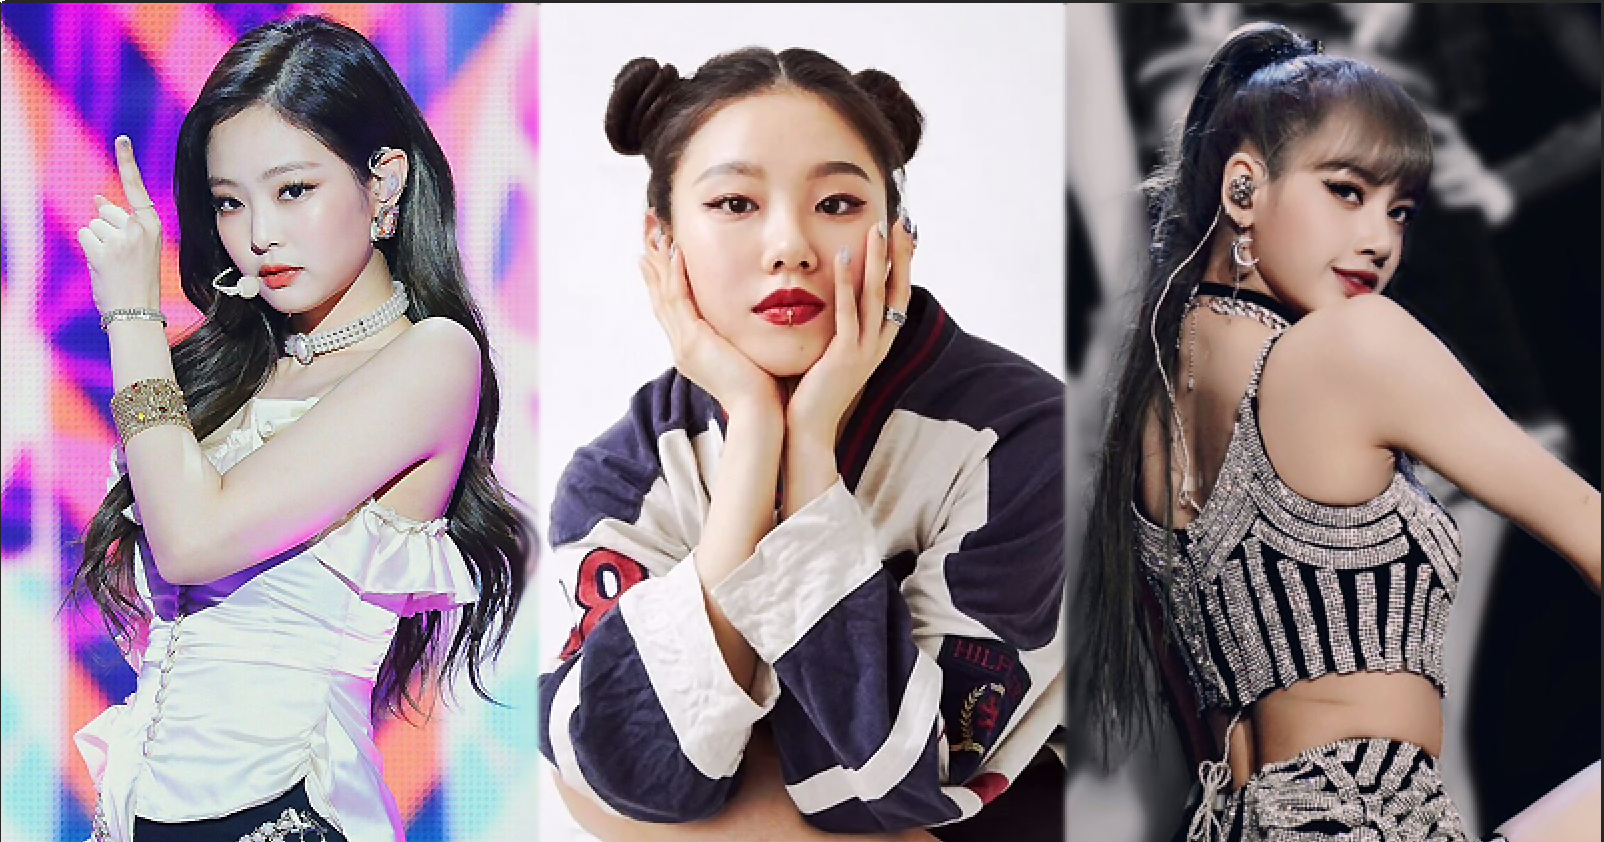 All of These Iconic K-Pop Dances Were Choreographed by This Choreographer